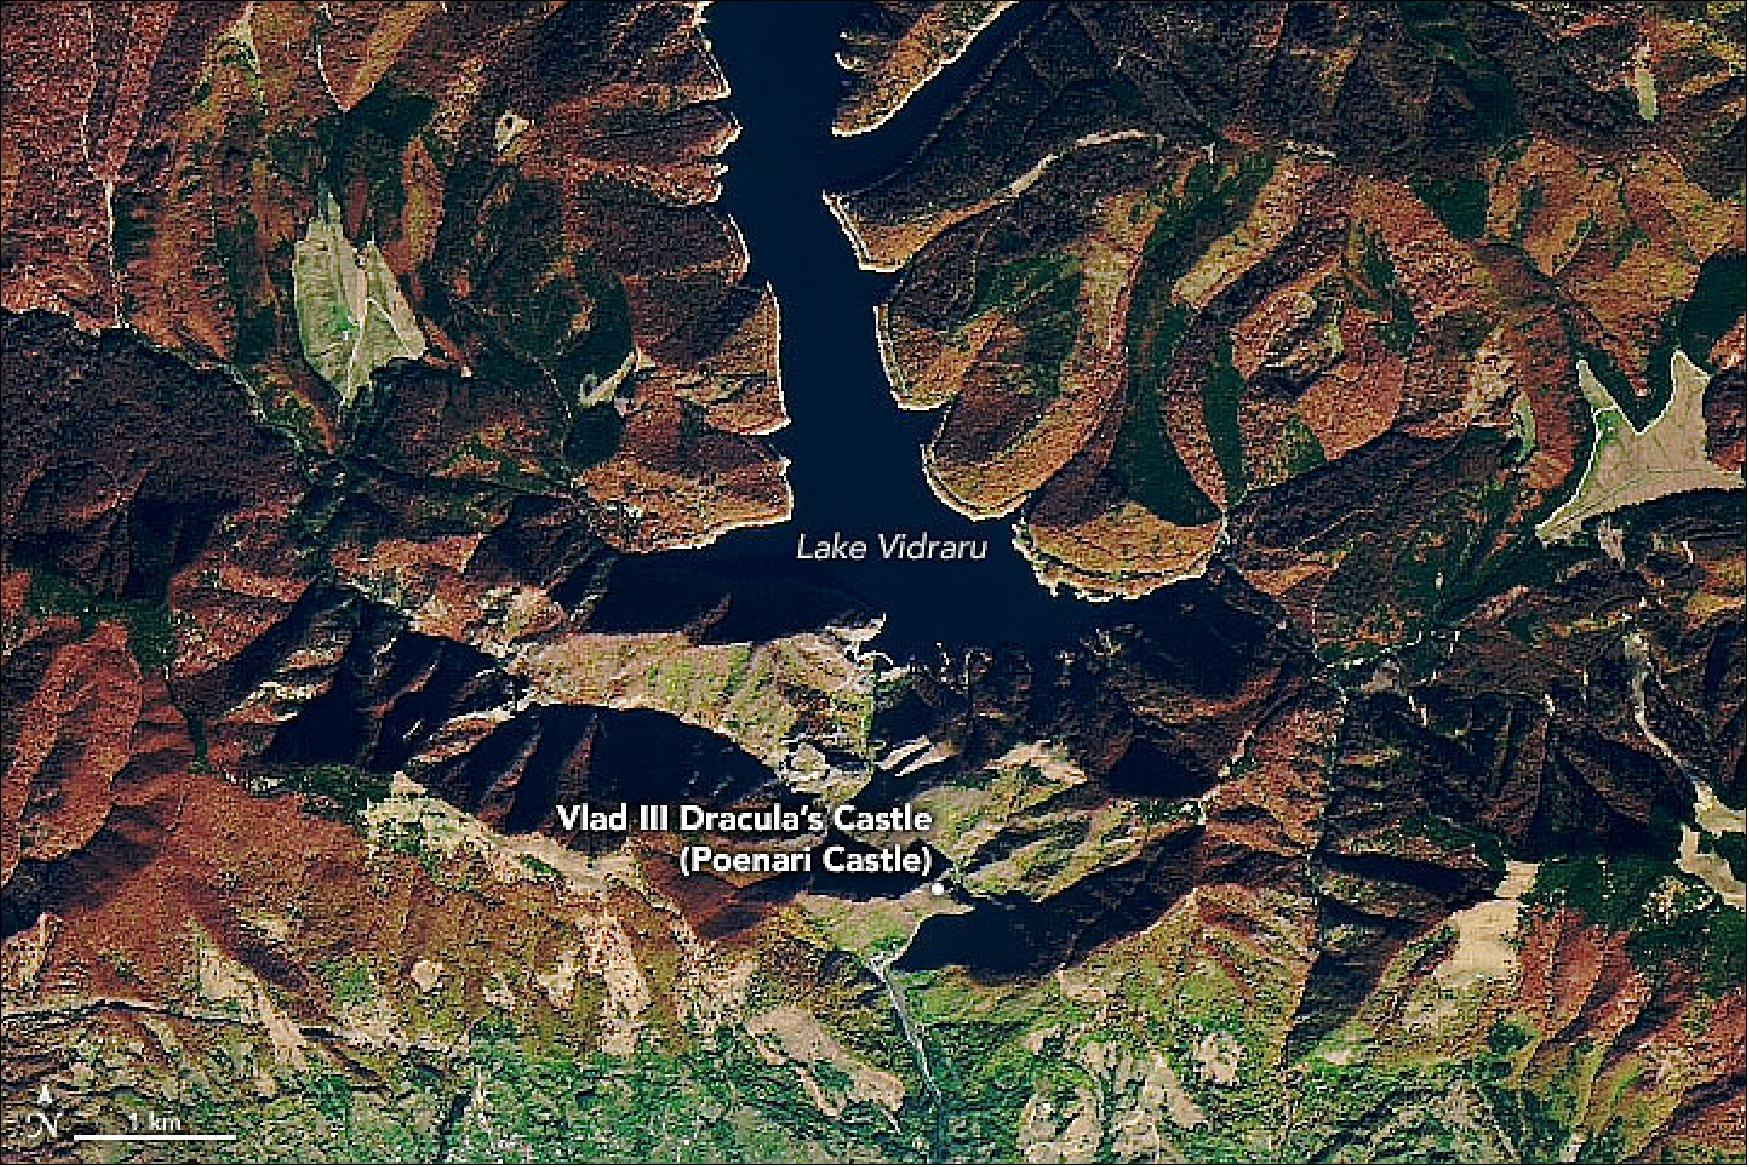 Figure 42: This natural colar image shows a more detailed view of the area around Poenari Castle and Lake Vidraru (a reservoir) as observed on October 24, 2019, by the Operational Land Imager (OLI) on the Landsat-8 satellite. Note the fall colors on the hillsides, as well as the foreboding shadows cast by the mountains. A drone flyover video gives an even closer perspective on the rugged landscape (image credit: NASA Earth Observatory, image by Joshua Stevens, using ICESat-2 data from the National Snow & Ice Center, topographic data from the SRTM, and Landsat data from the U.S. Geological Survey. Story by Mike Carlowicz)